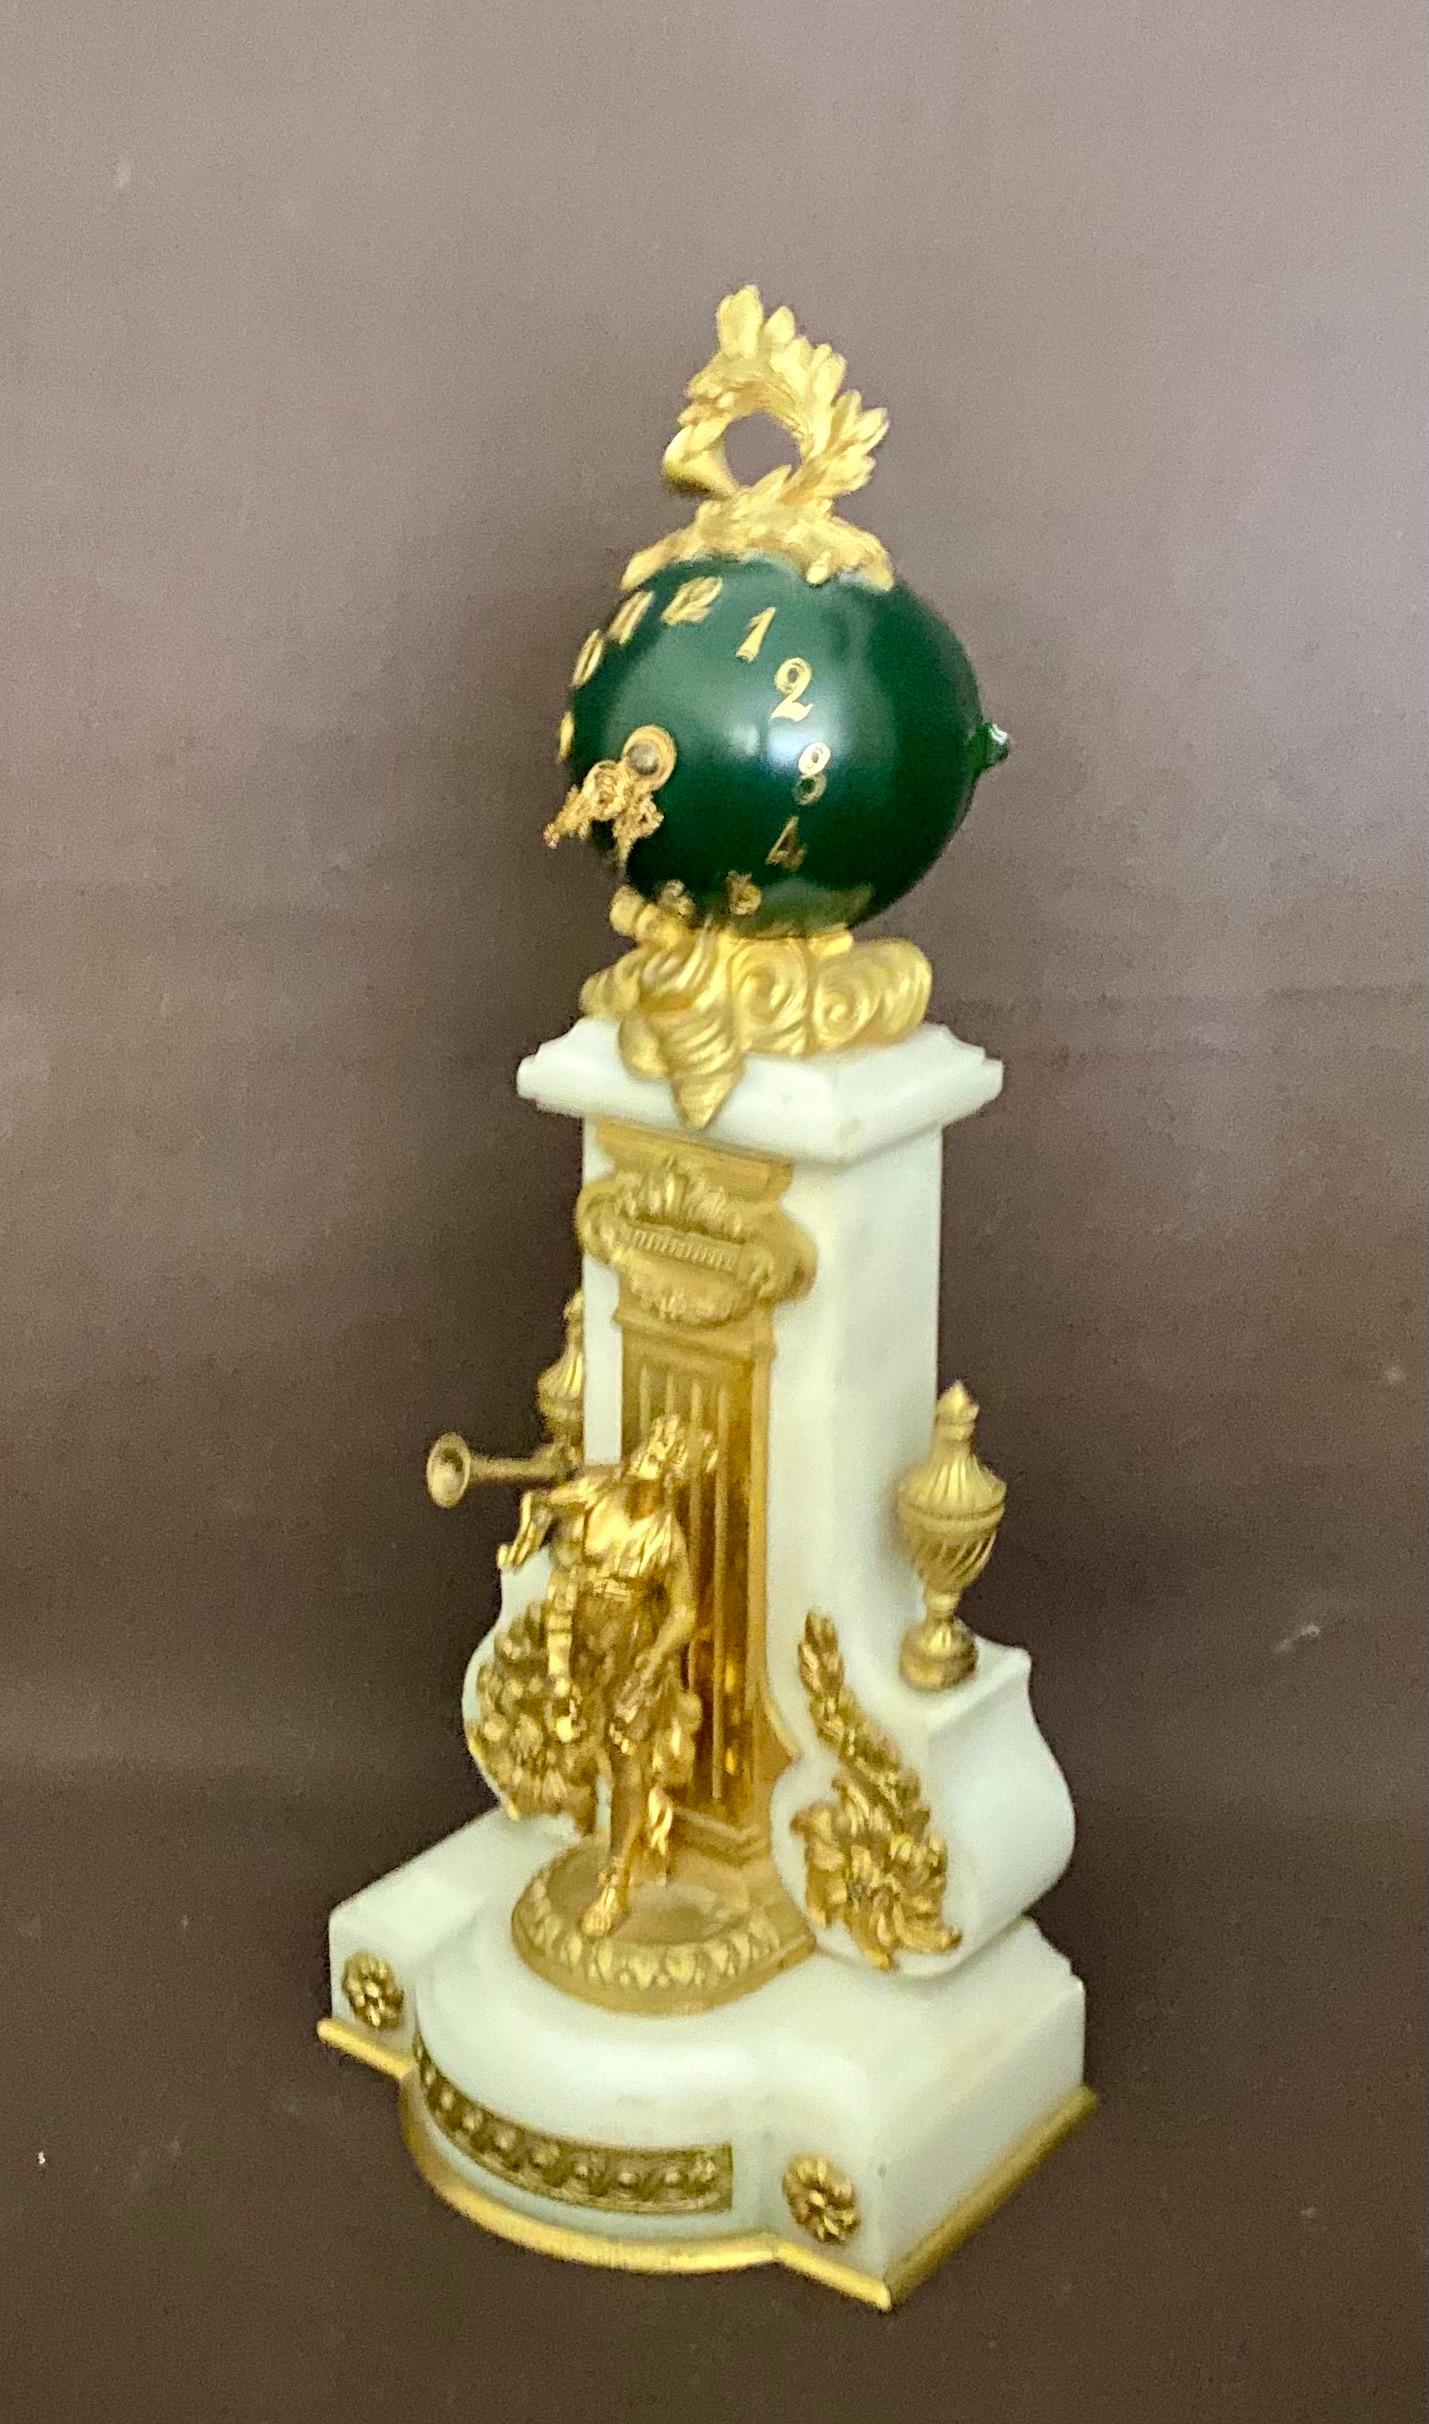 Antique French White Marble, Patinated Bronze and Ormolu Globe Clock 1